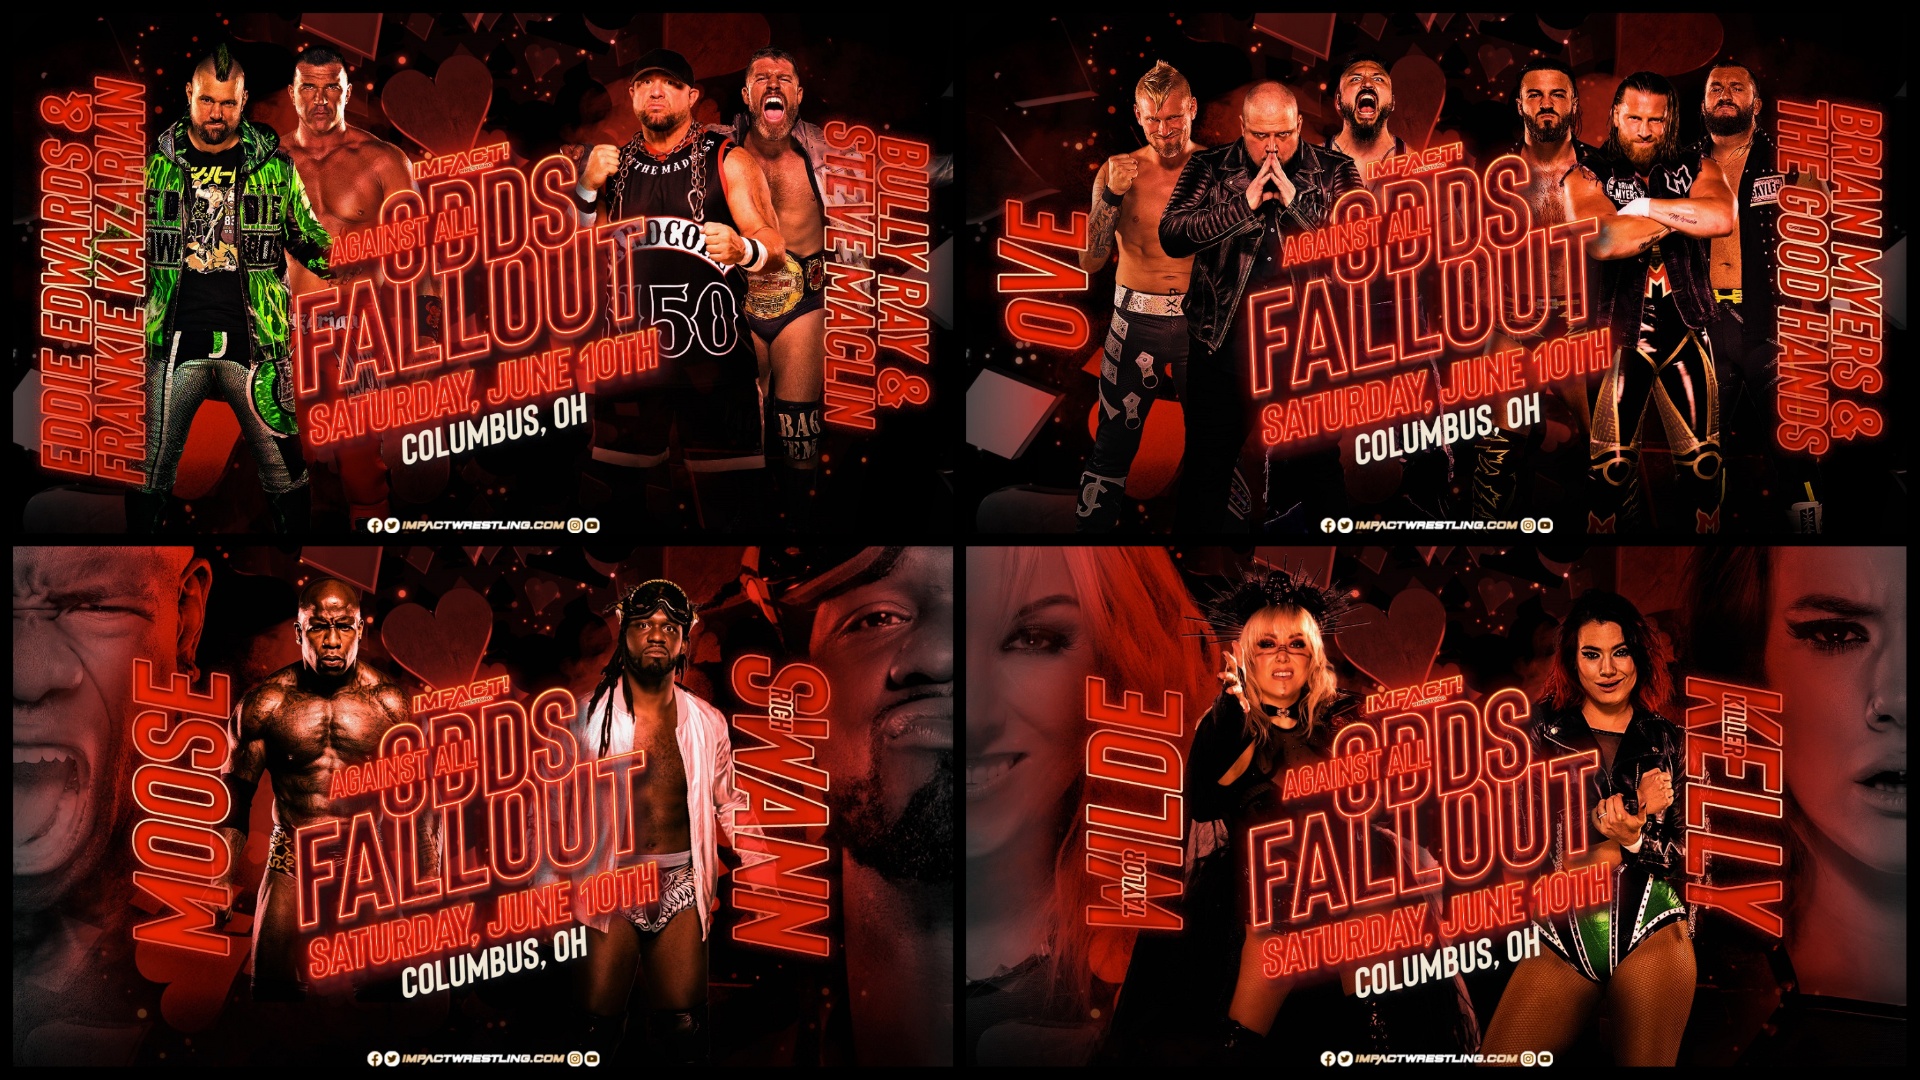 Columbus, Ohio! Don’t Miss These Incredible Matches & More This Saturday at Against All Odds Fallout